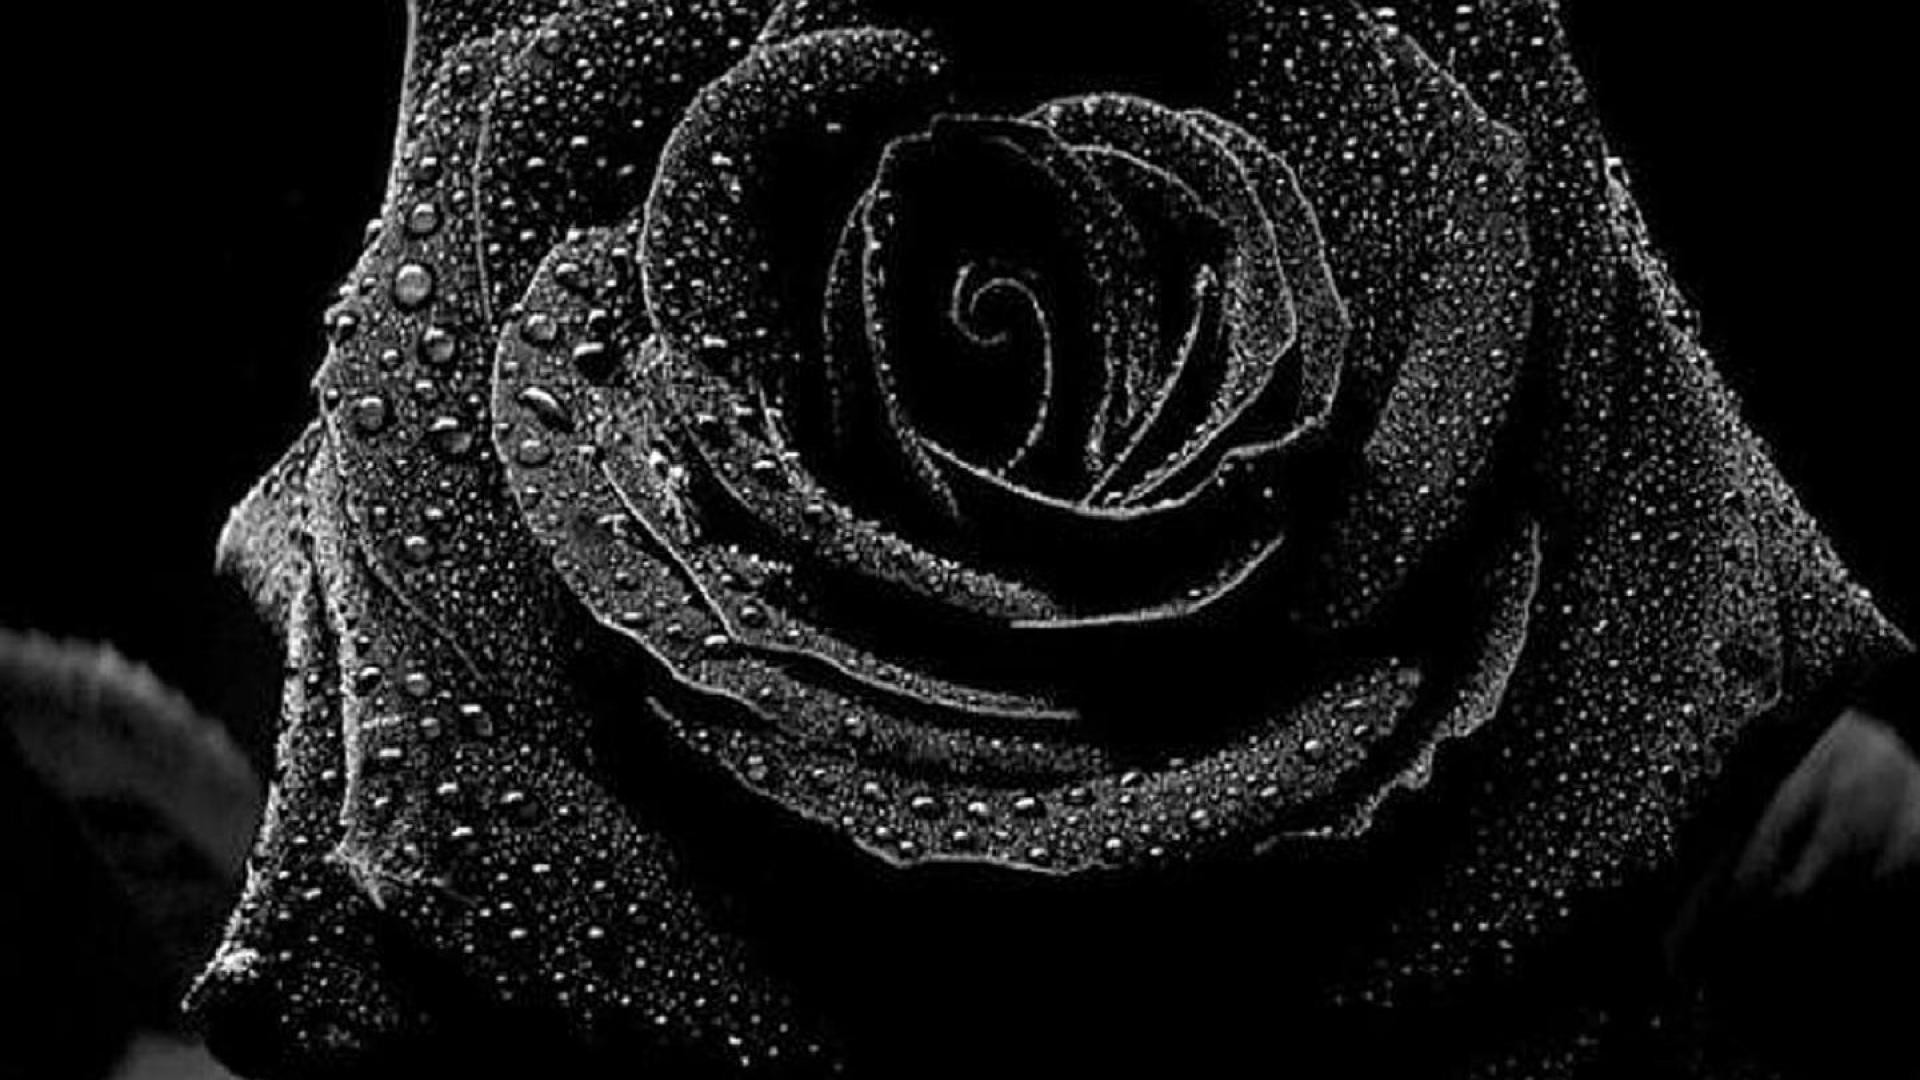 1920x1080 Beautiful Pictures Of Roses wallpaper | wallpapers,themes,ect. | Pinterest  | Wallpaper